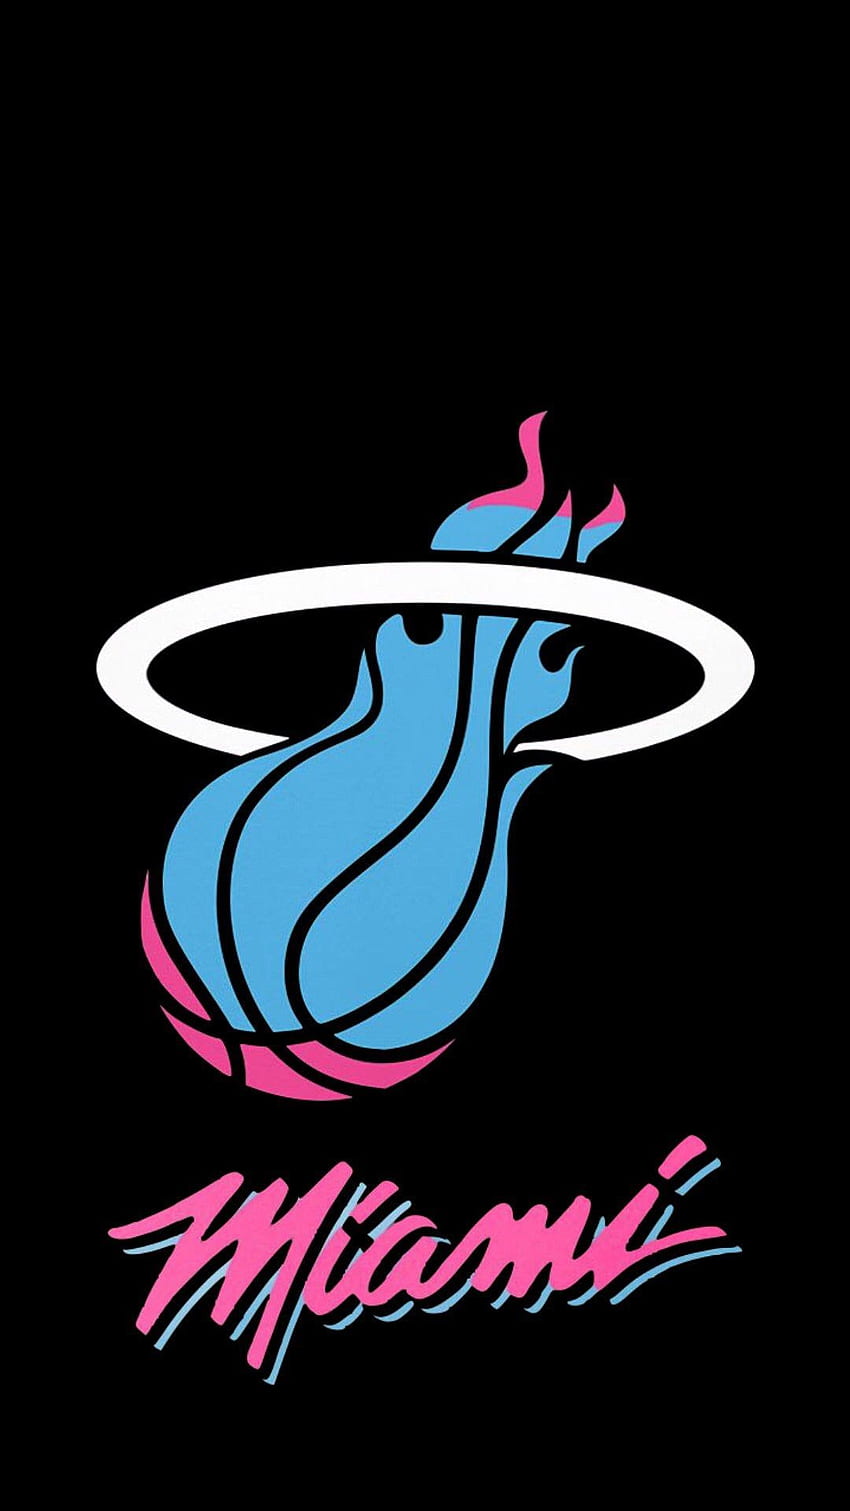 I should be probably productive at work instead of making Miami Heat phone but it's too much fun. Here's another one I just made using the logos from the new shirts, Miami Pink HD phone wallpaper